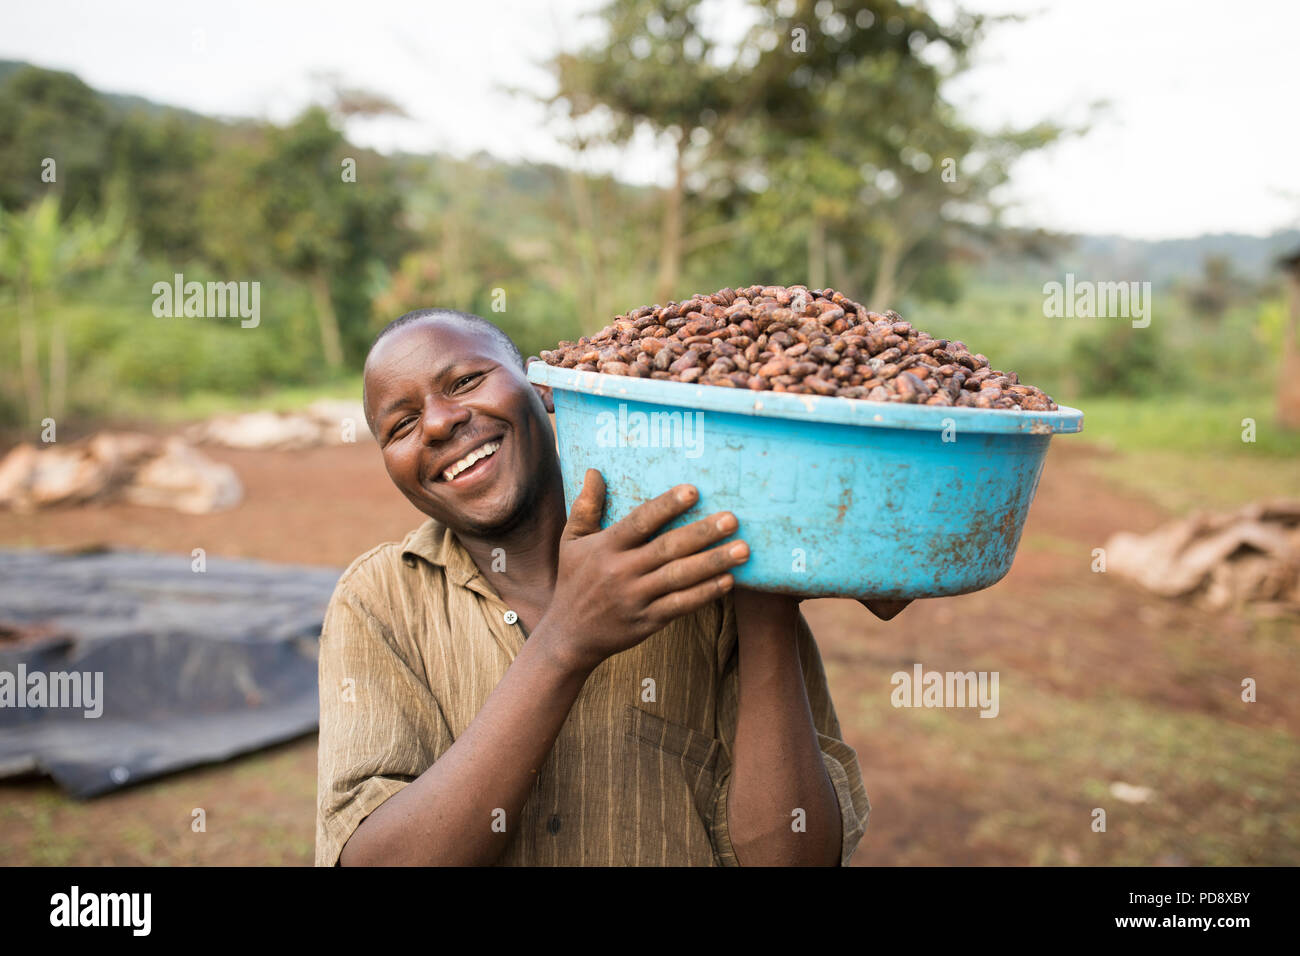 A worker helps to processes fermented cocoa beans at a chocolate production facility in Mukono District, Uganda. Stock Photo